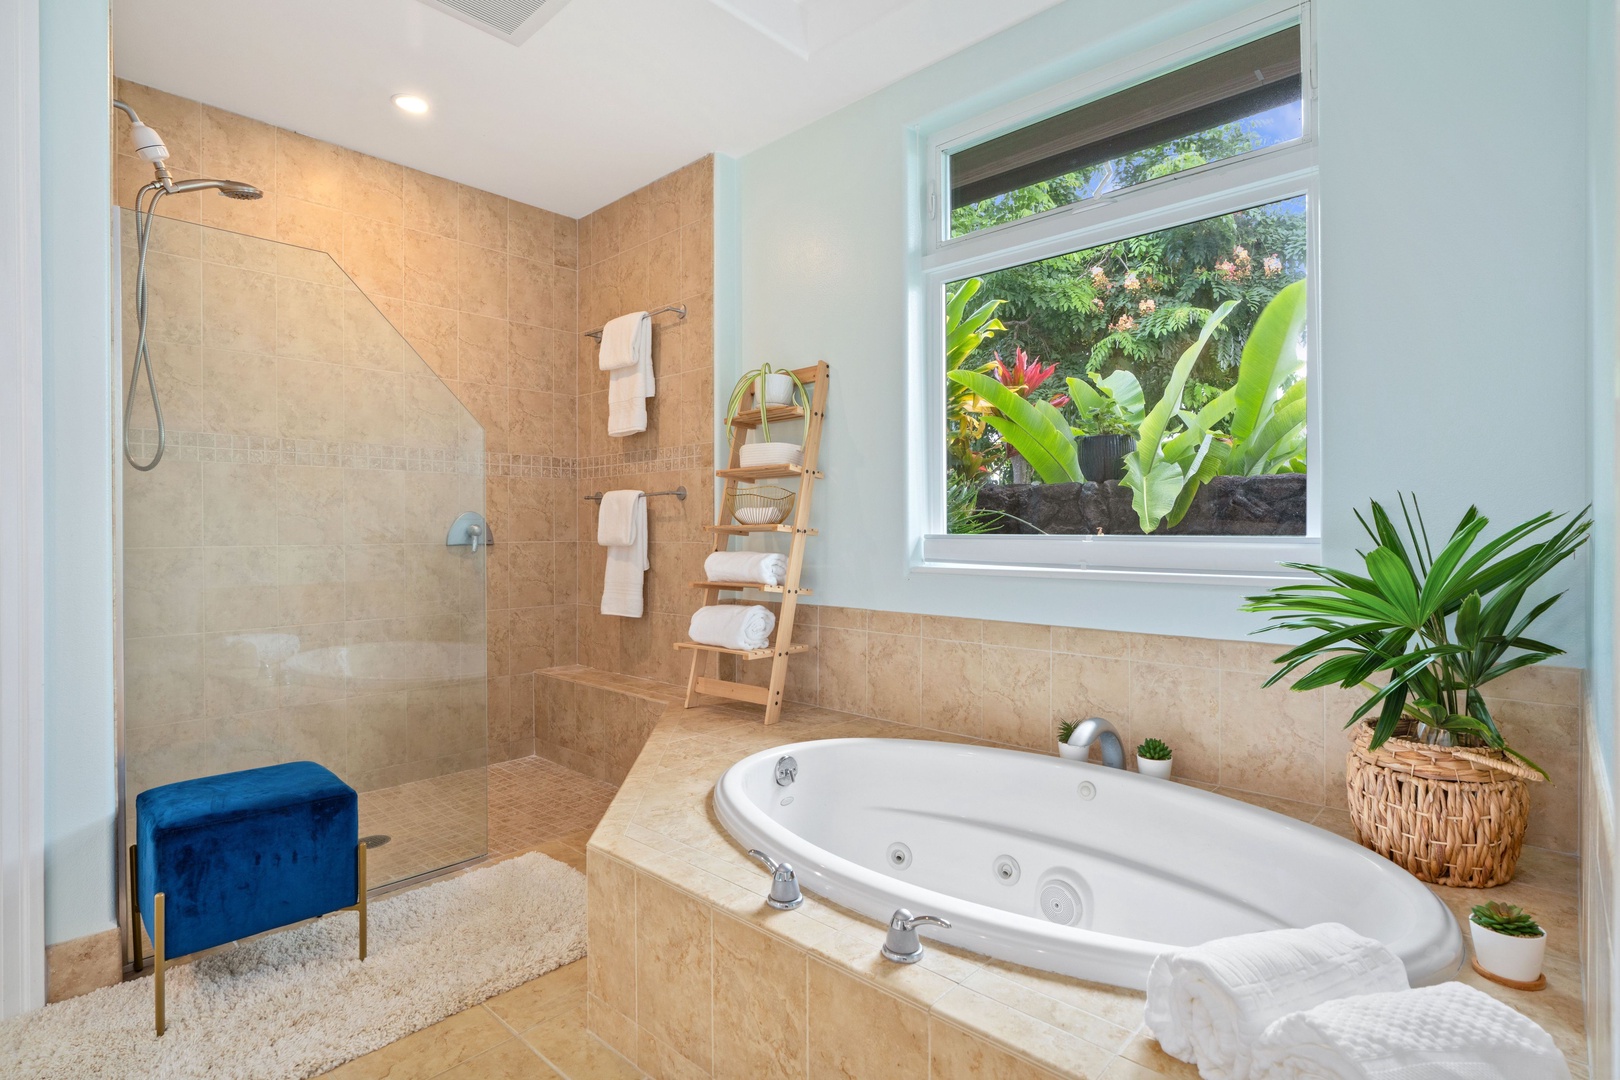 Princeville Vacation Rentals, Tropical Elegance - Elegant appointments in the primary with a hot tub and walk-in shower